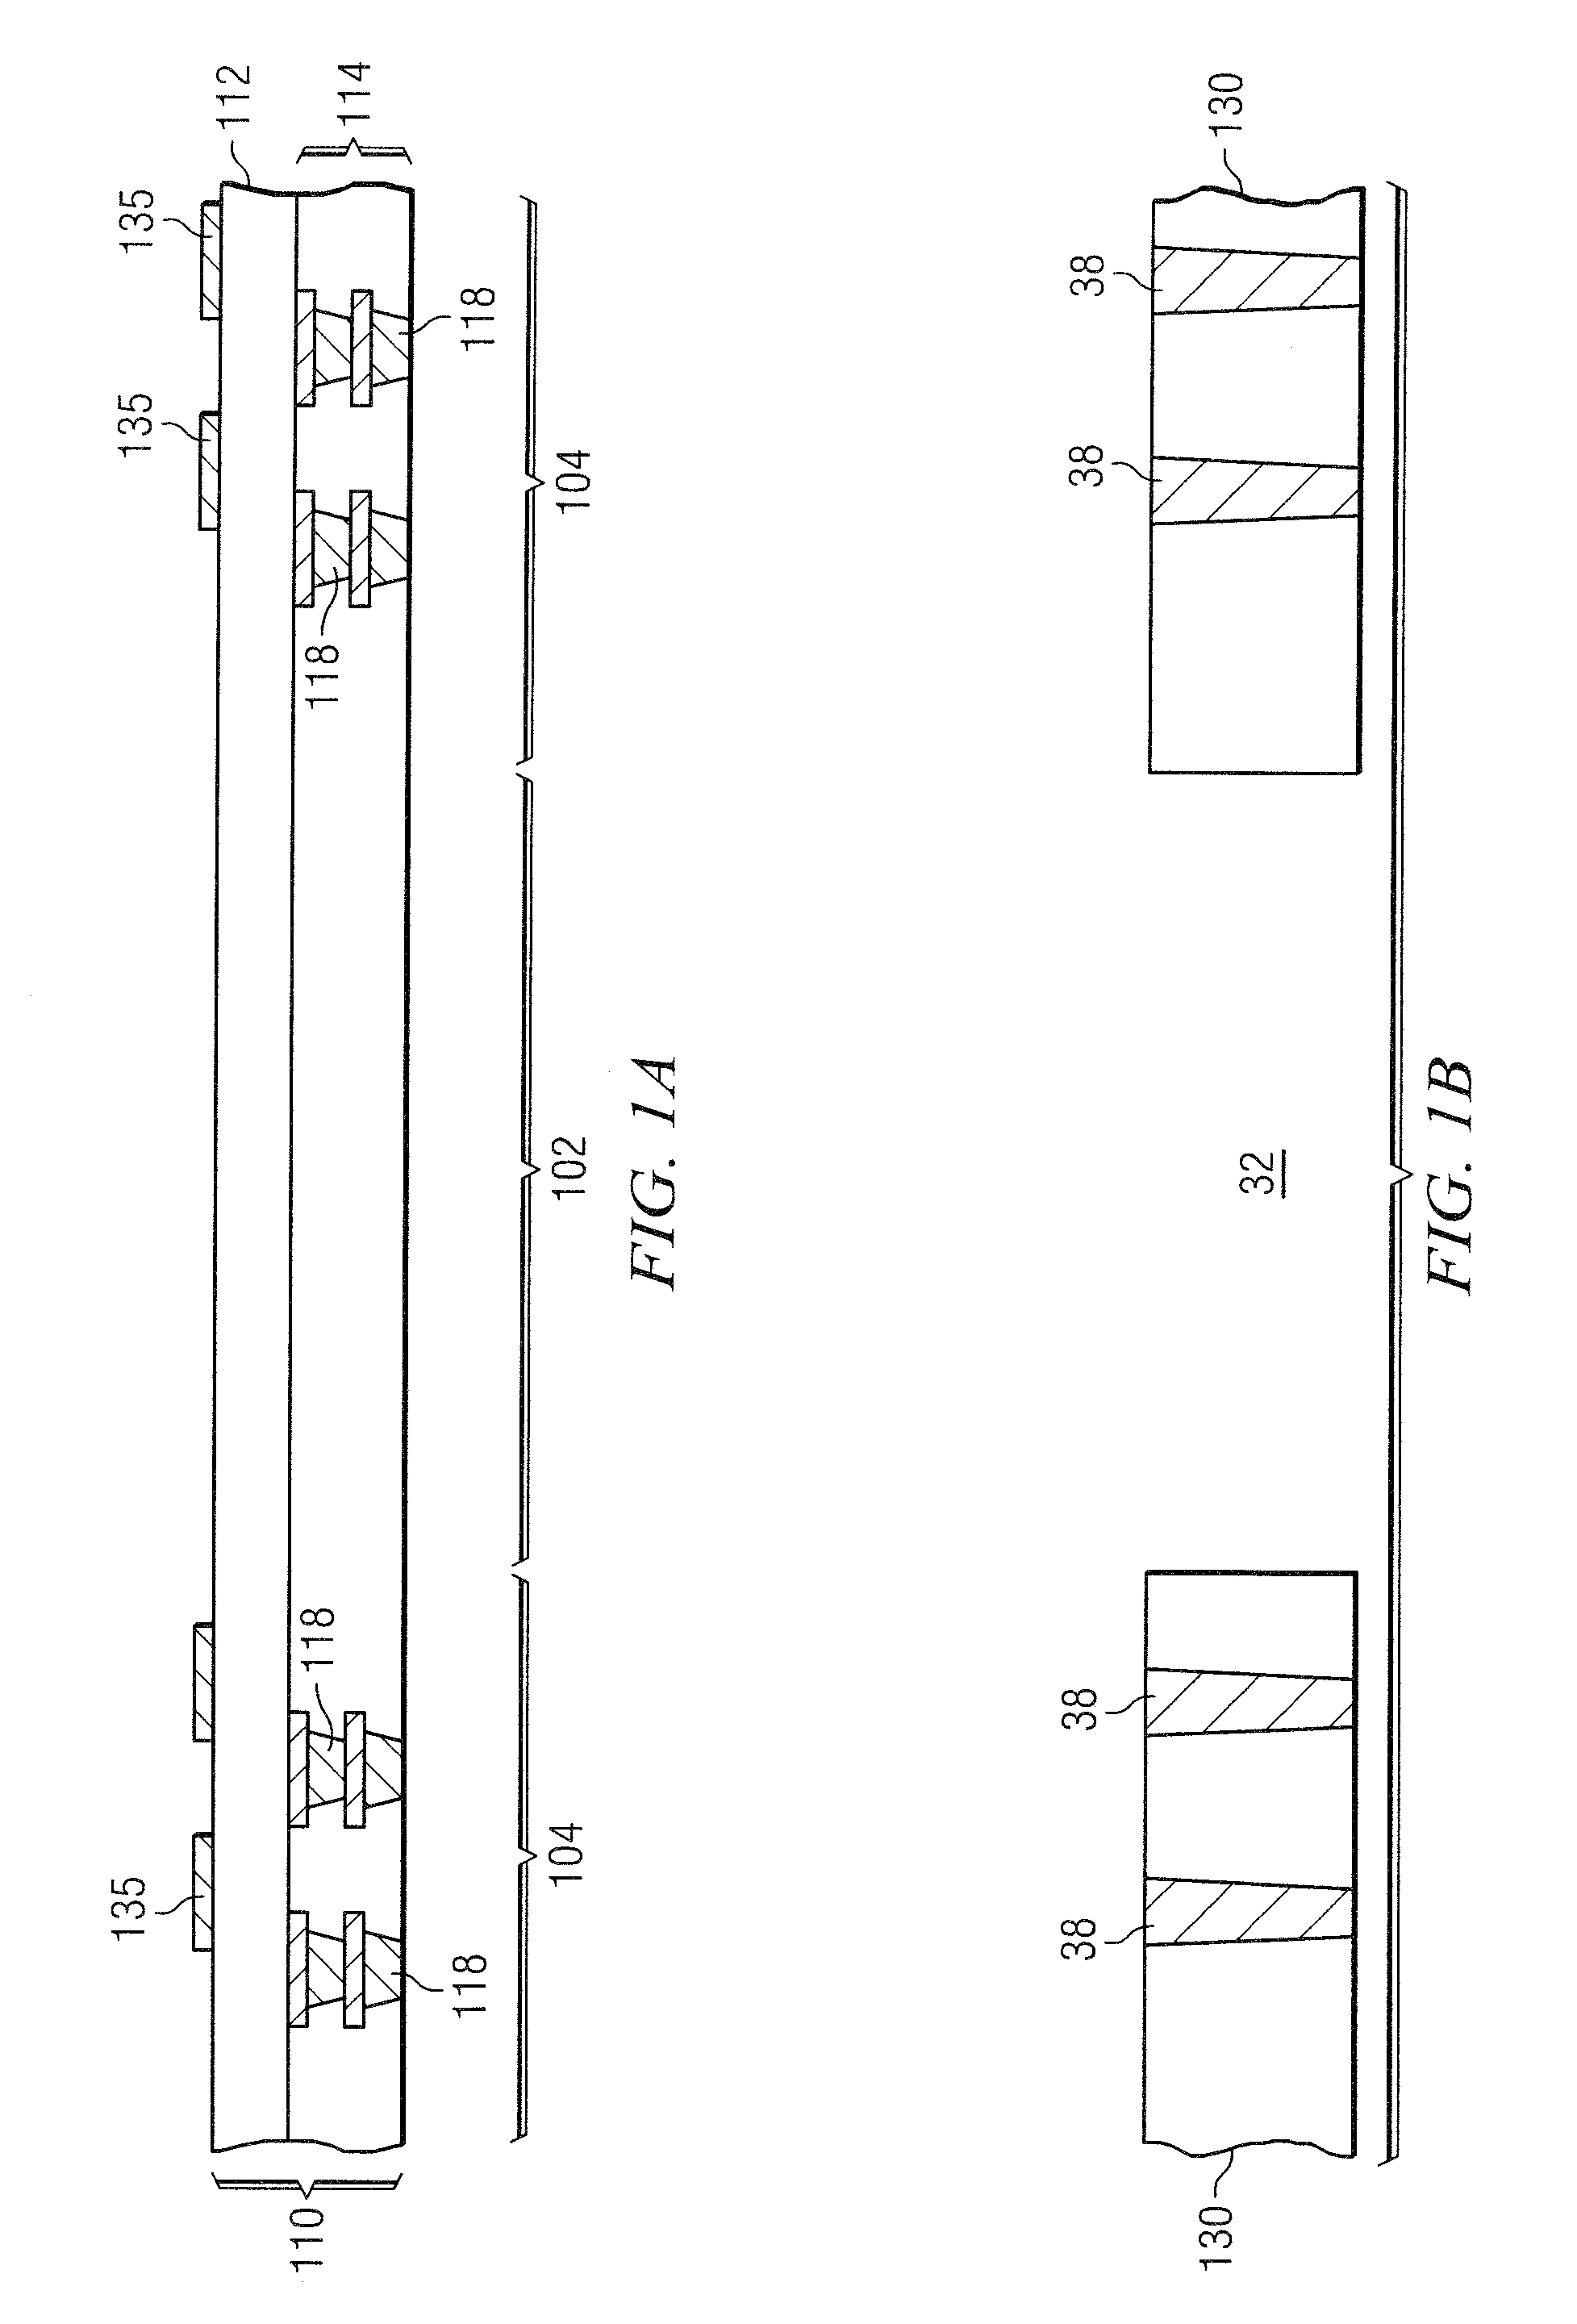 Substrate structure for cavity package